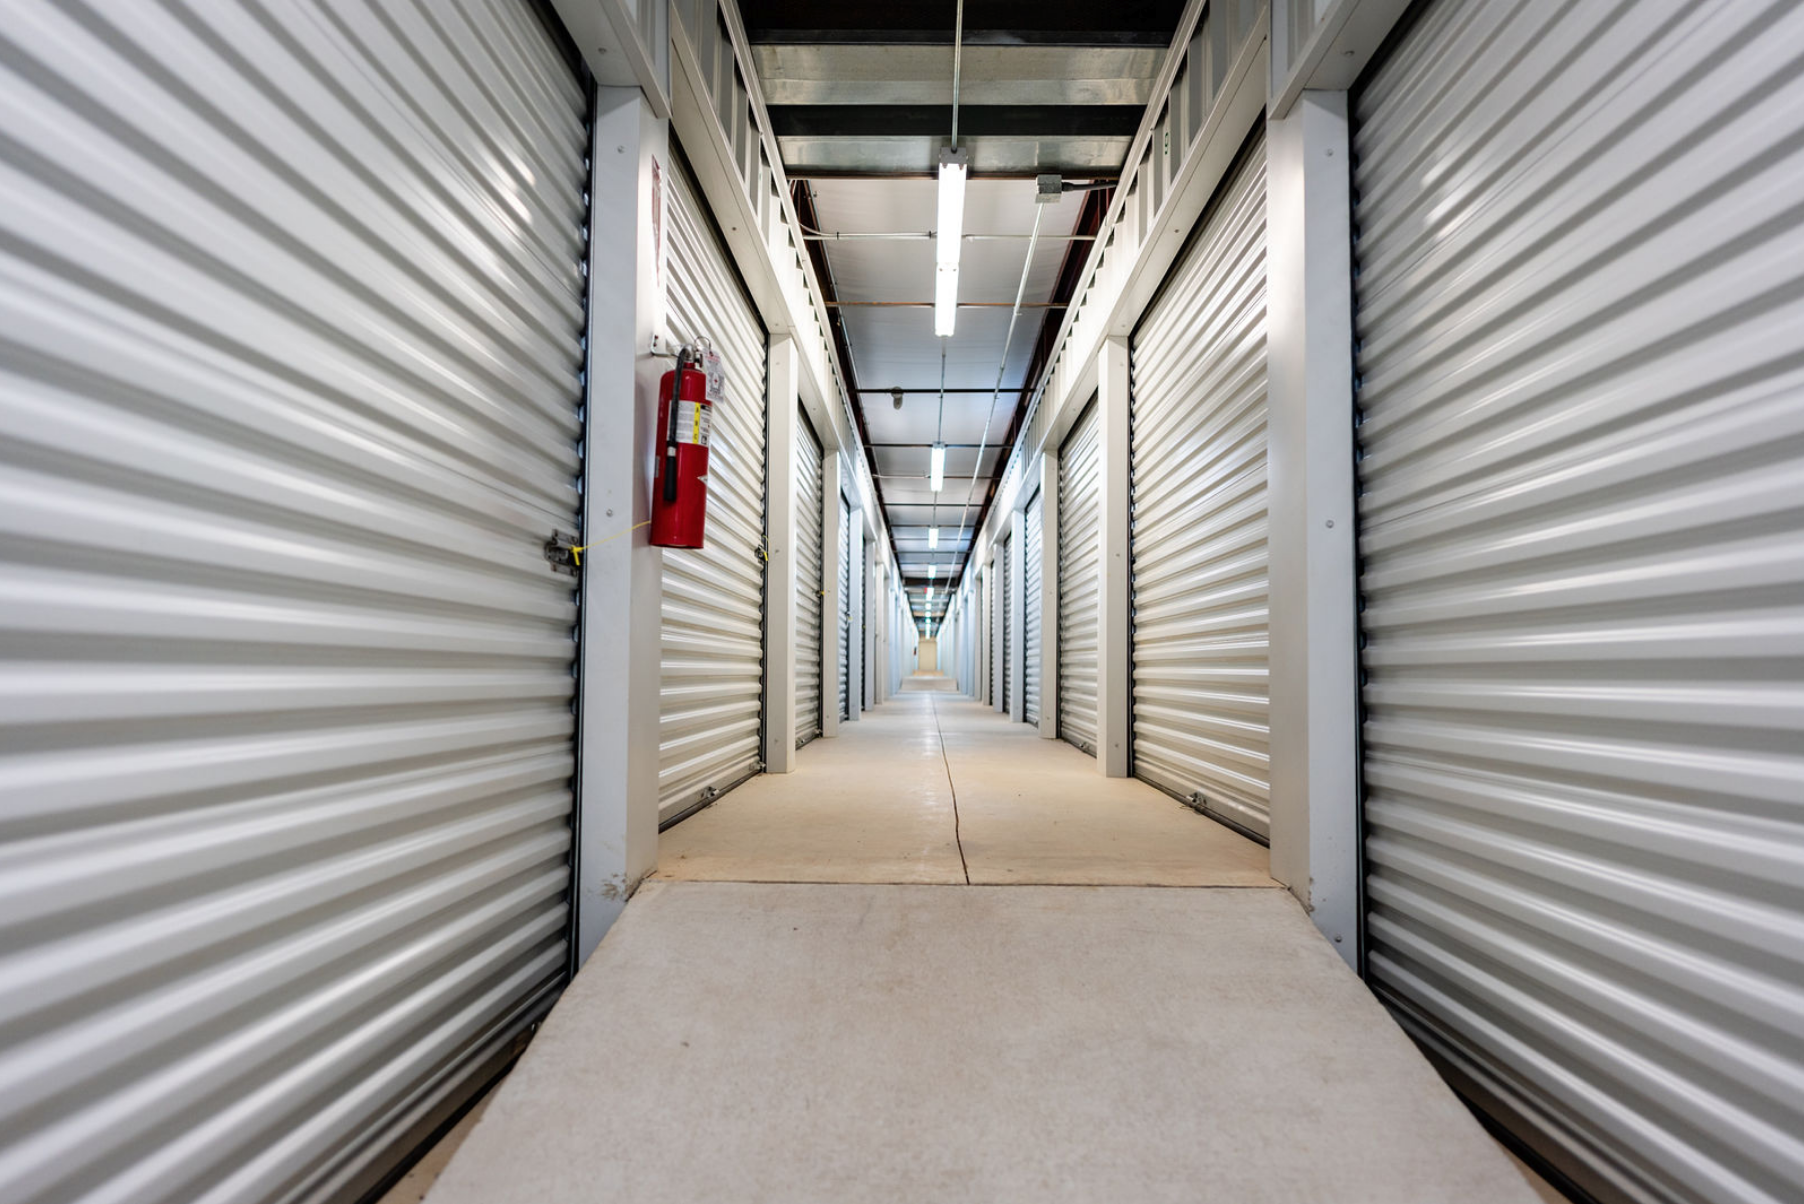 Climate Controlled Self Storage